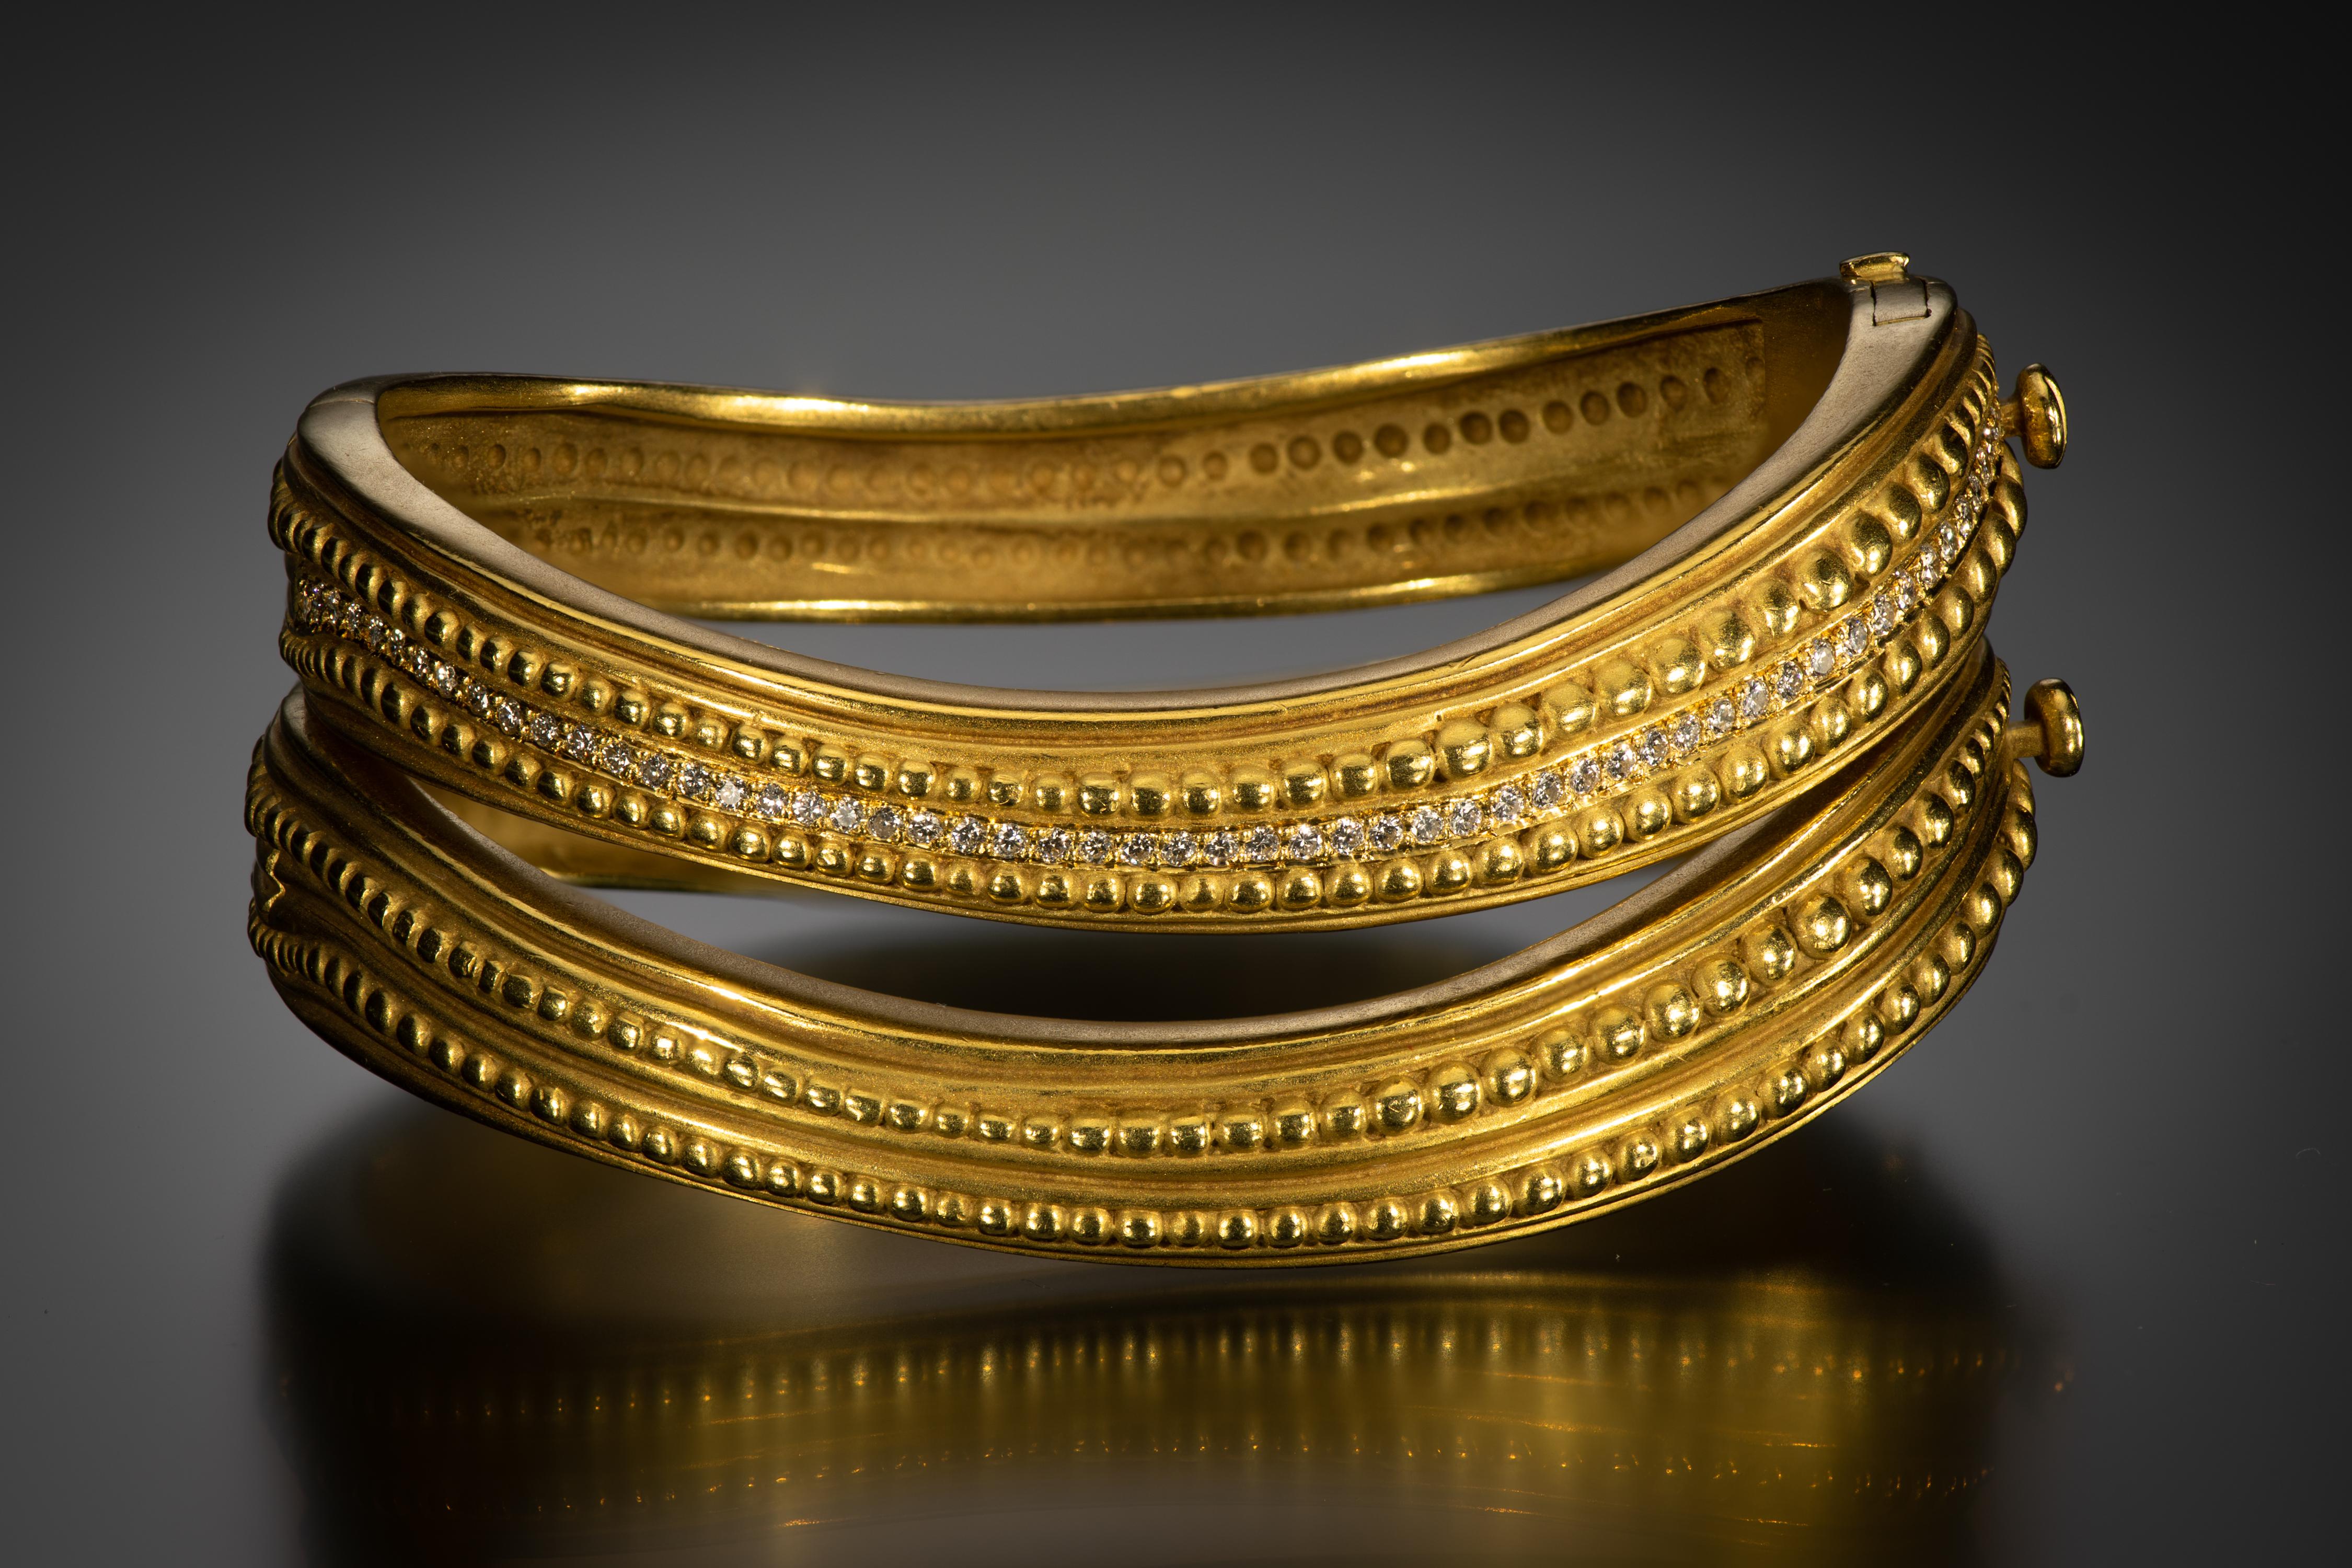 These vintage “caviar” bangles from famed jewelry Barry Kieselstein-Cord are made of solid, hammered 18k gold. They have an elegant sculptural shape with grooved and beaded textures, one featuring diamond accents. Wear on each arm or stack them for